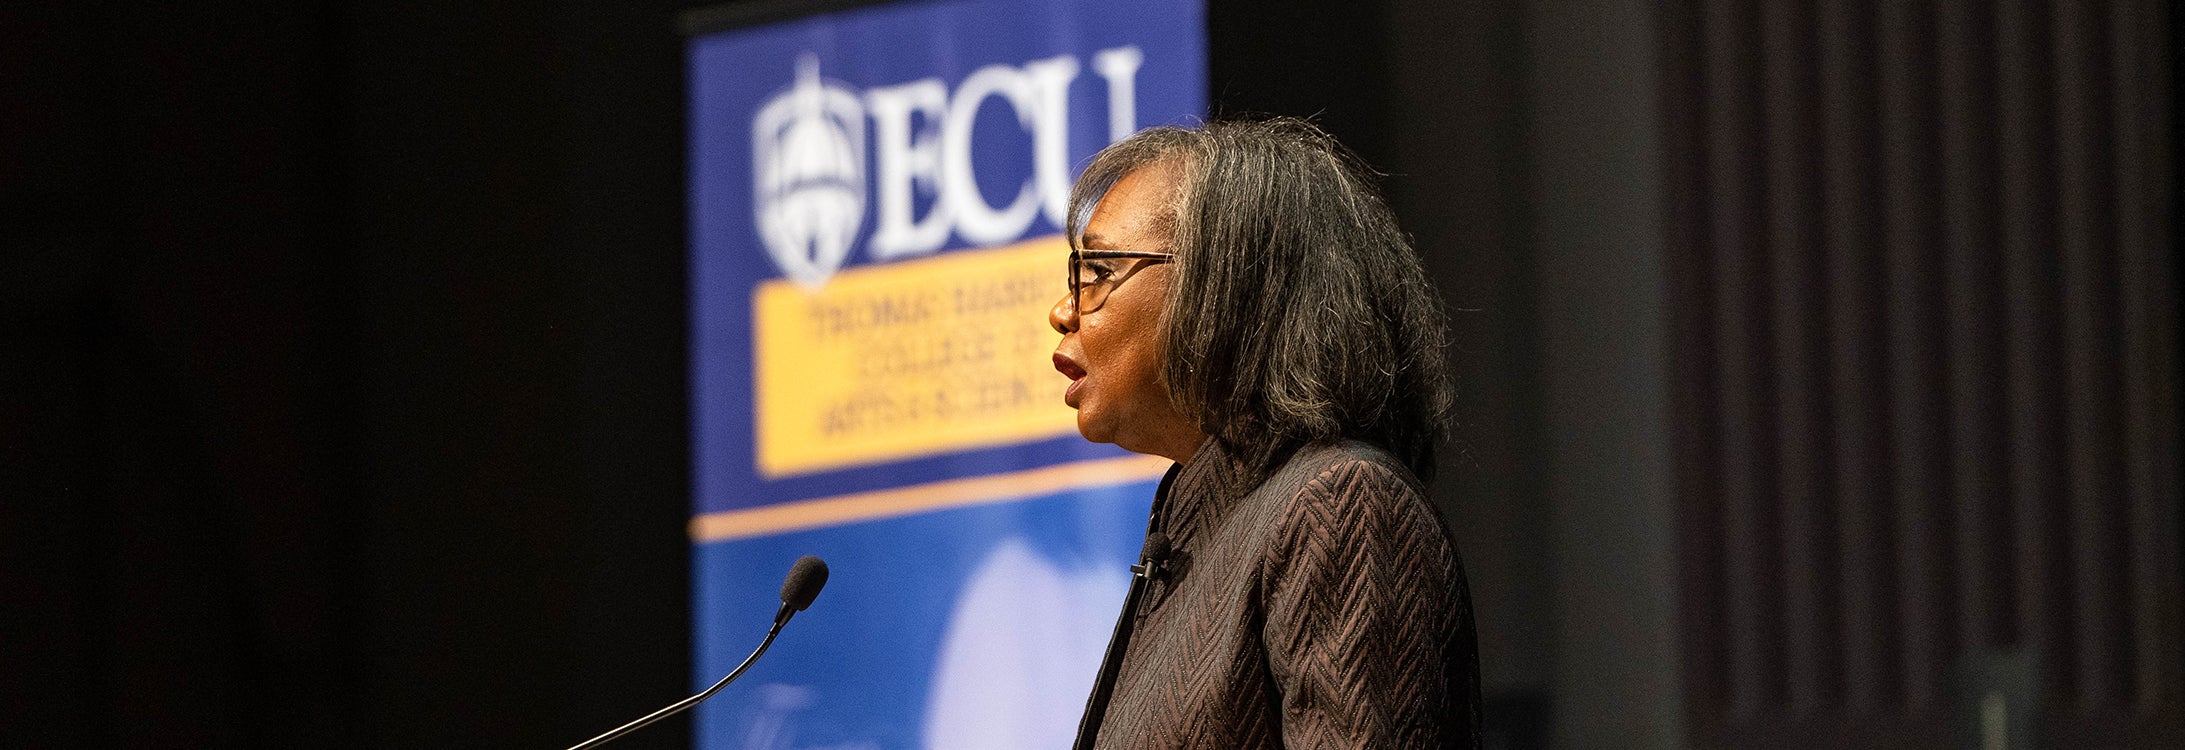 Anita Hill, law professor and women’s and civil rights advocate, spoke to a nearly full house in ECU’s Wright Auditorium on Nov. 15. (Photo by Cliff Hollis)